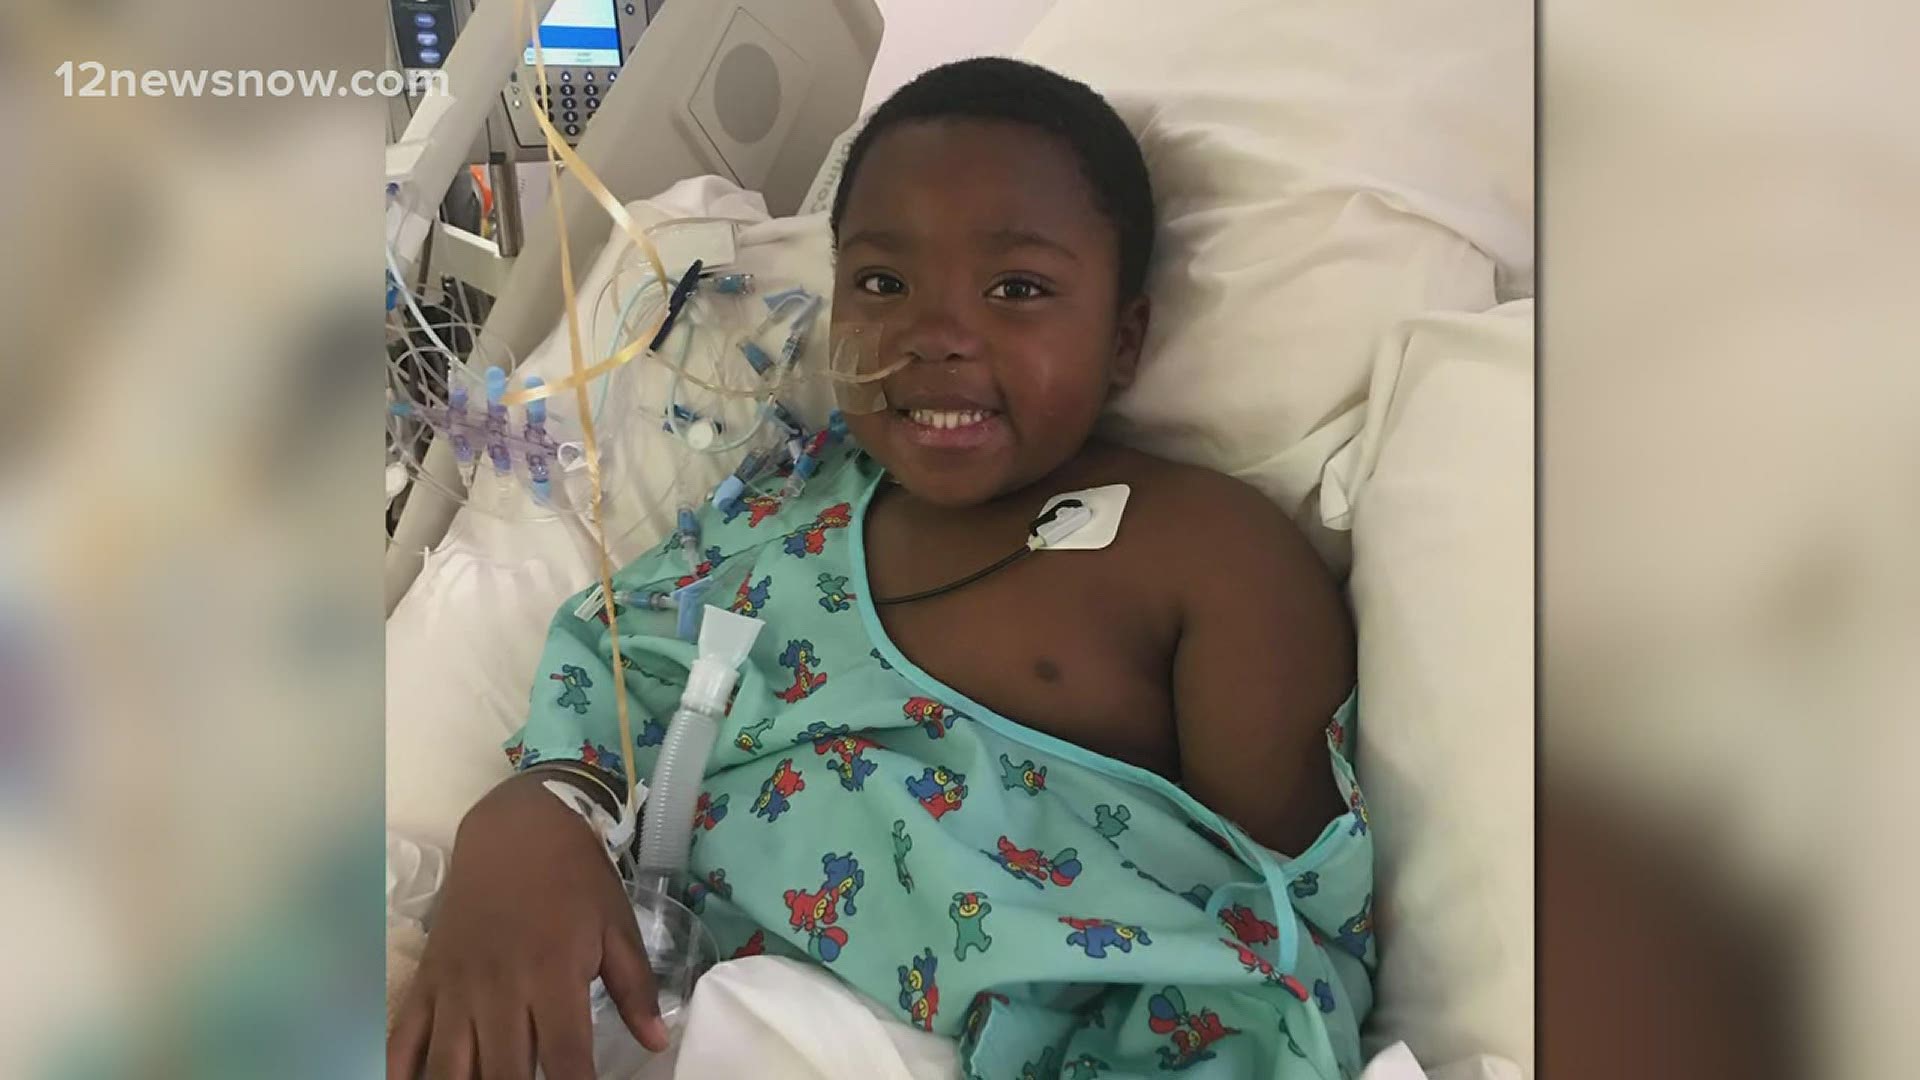 7-year-old recovering from battle with COVID-19 after 12 days on ventilator